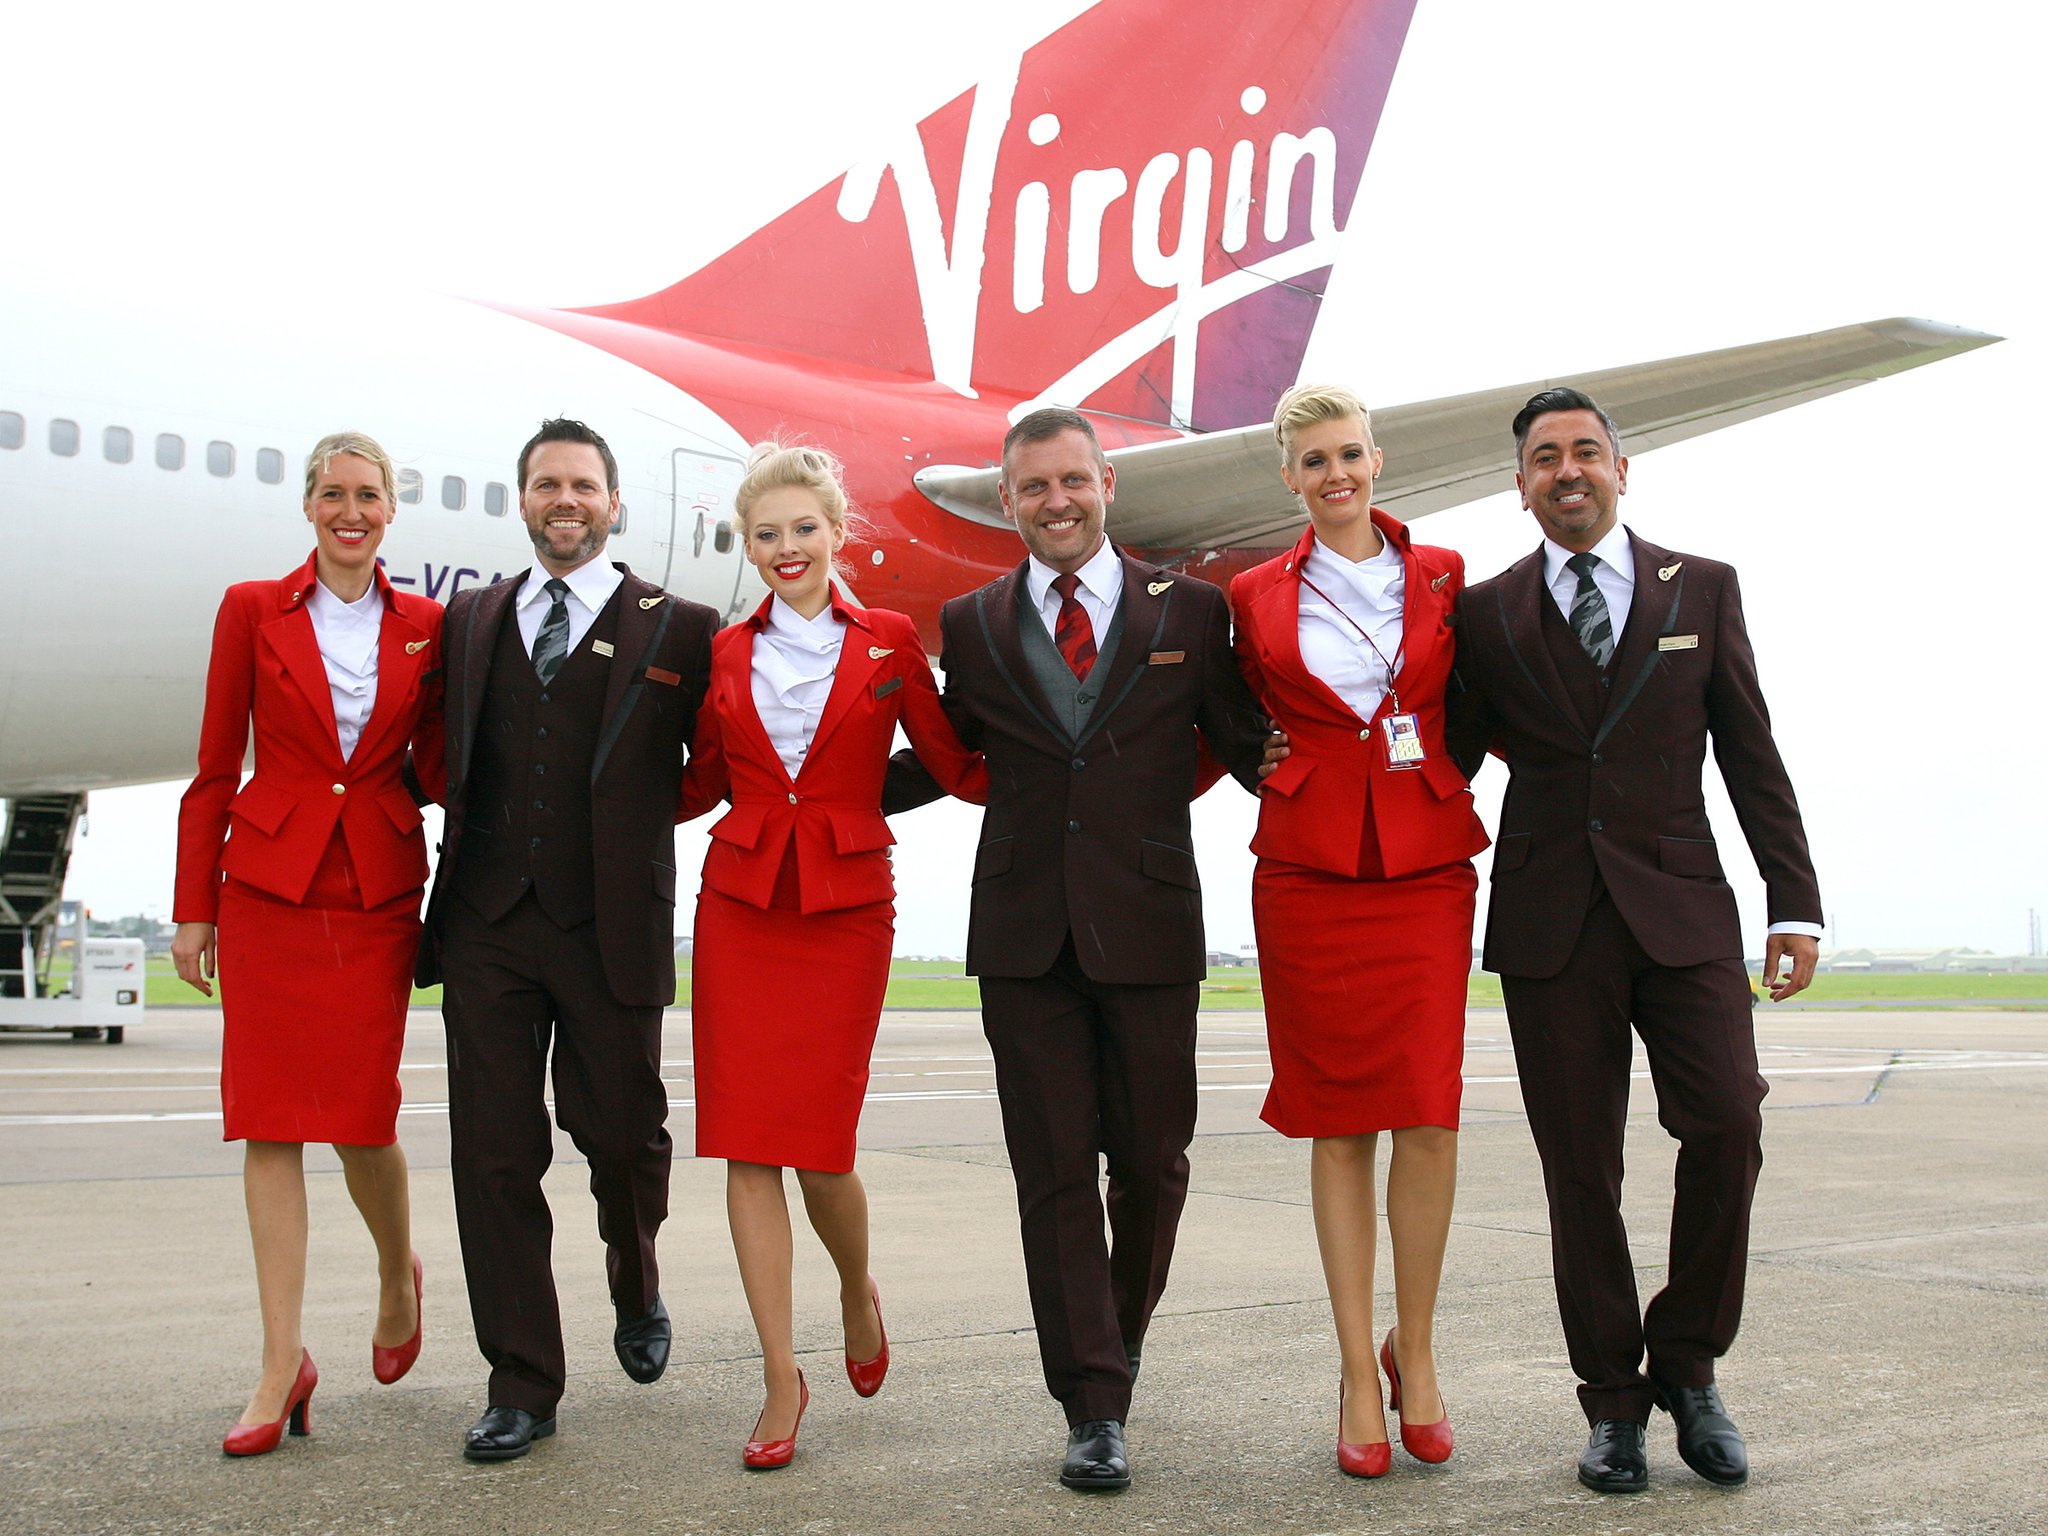 A day in the life of Cabin Crew